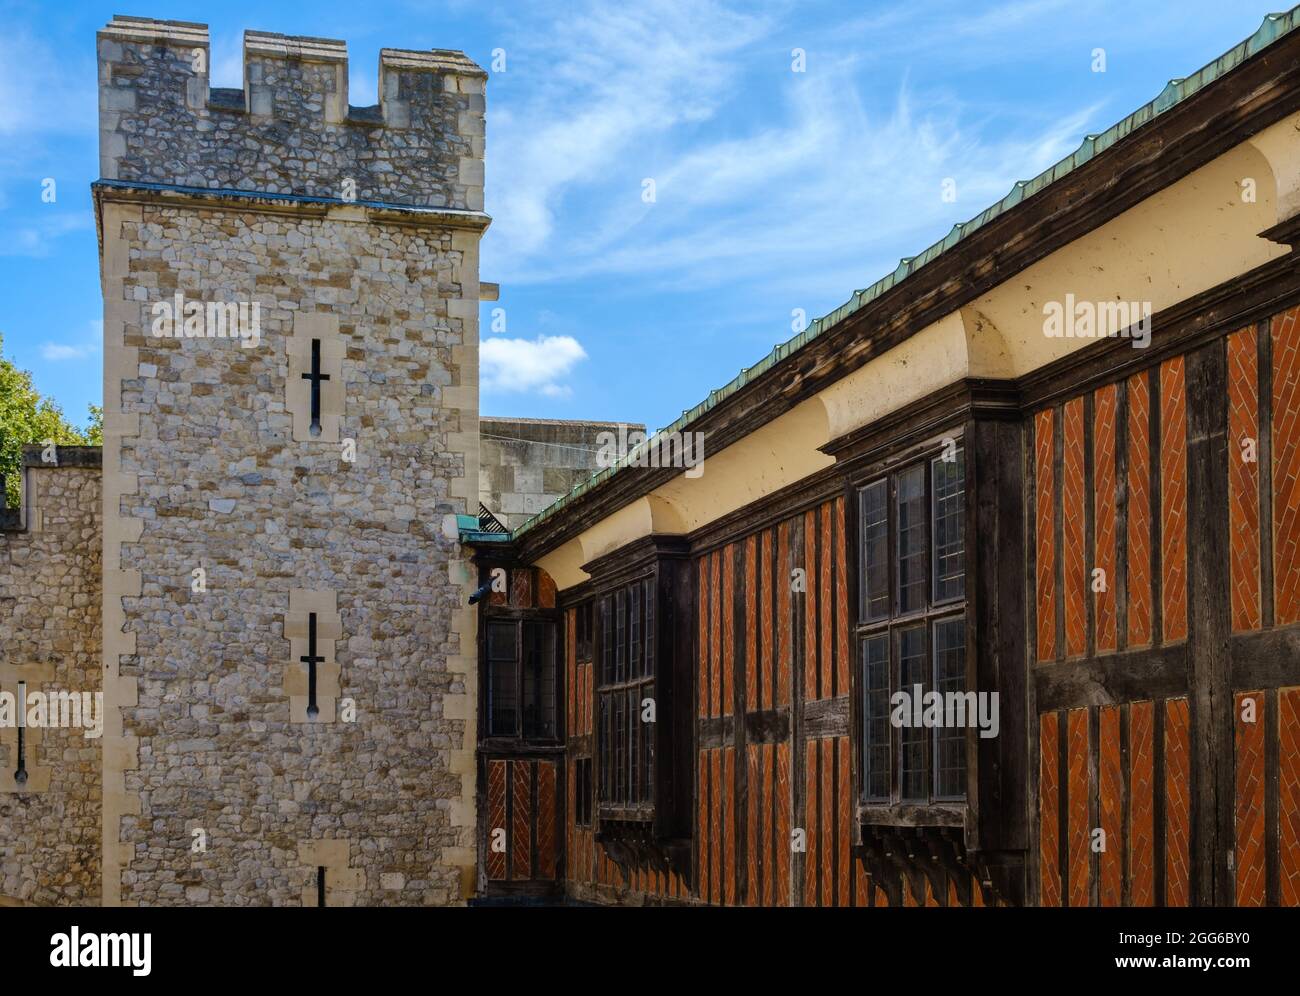 Wakefield Tower, in the famous Tower of London Complex, iconic medieval fortress in London, England. Stock Photo